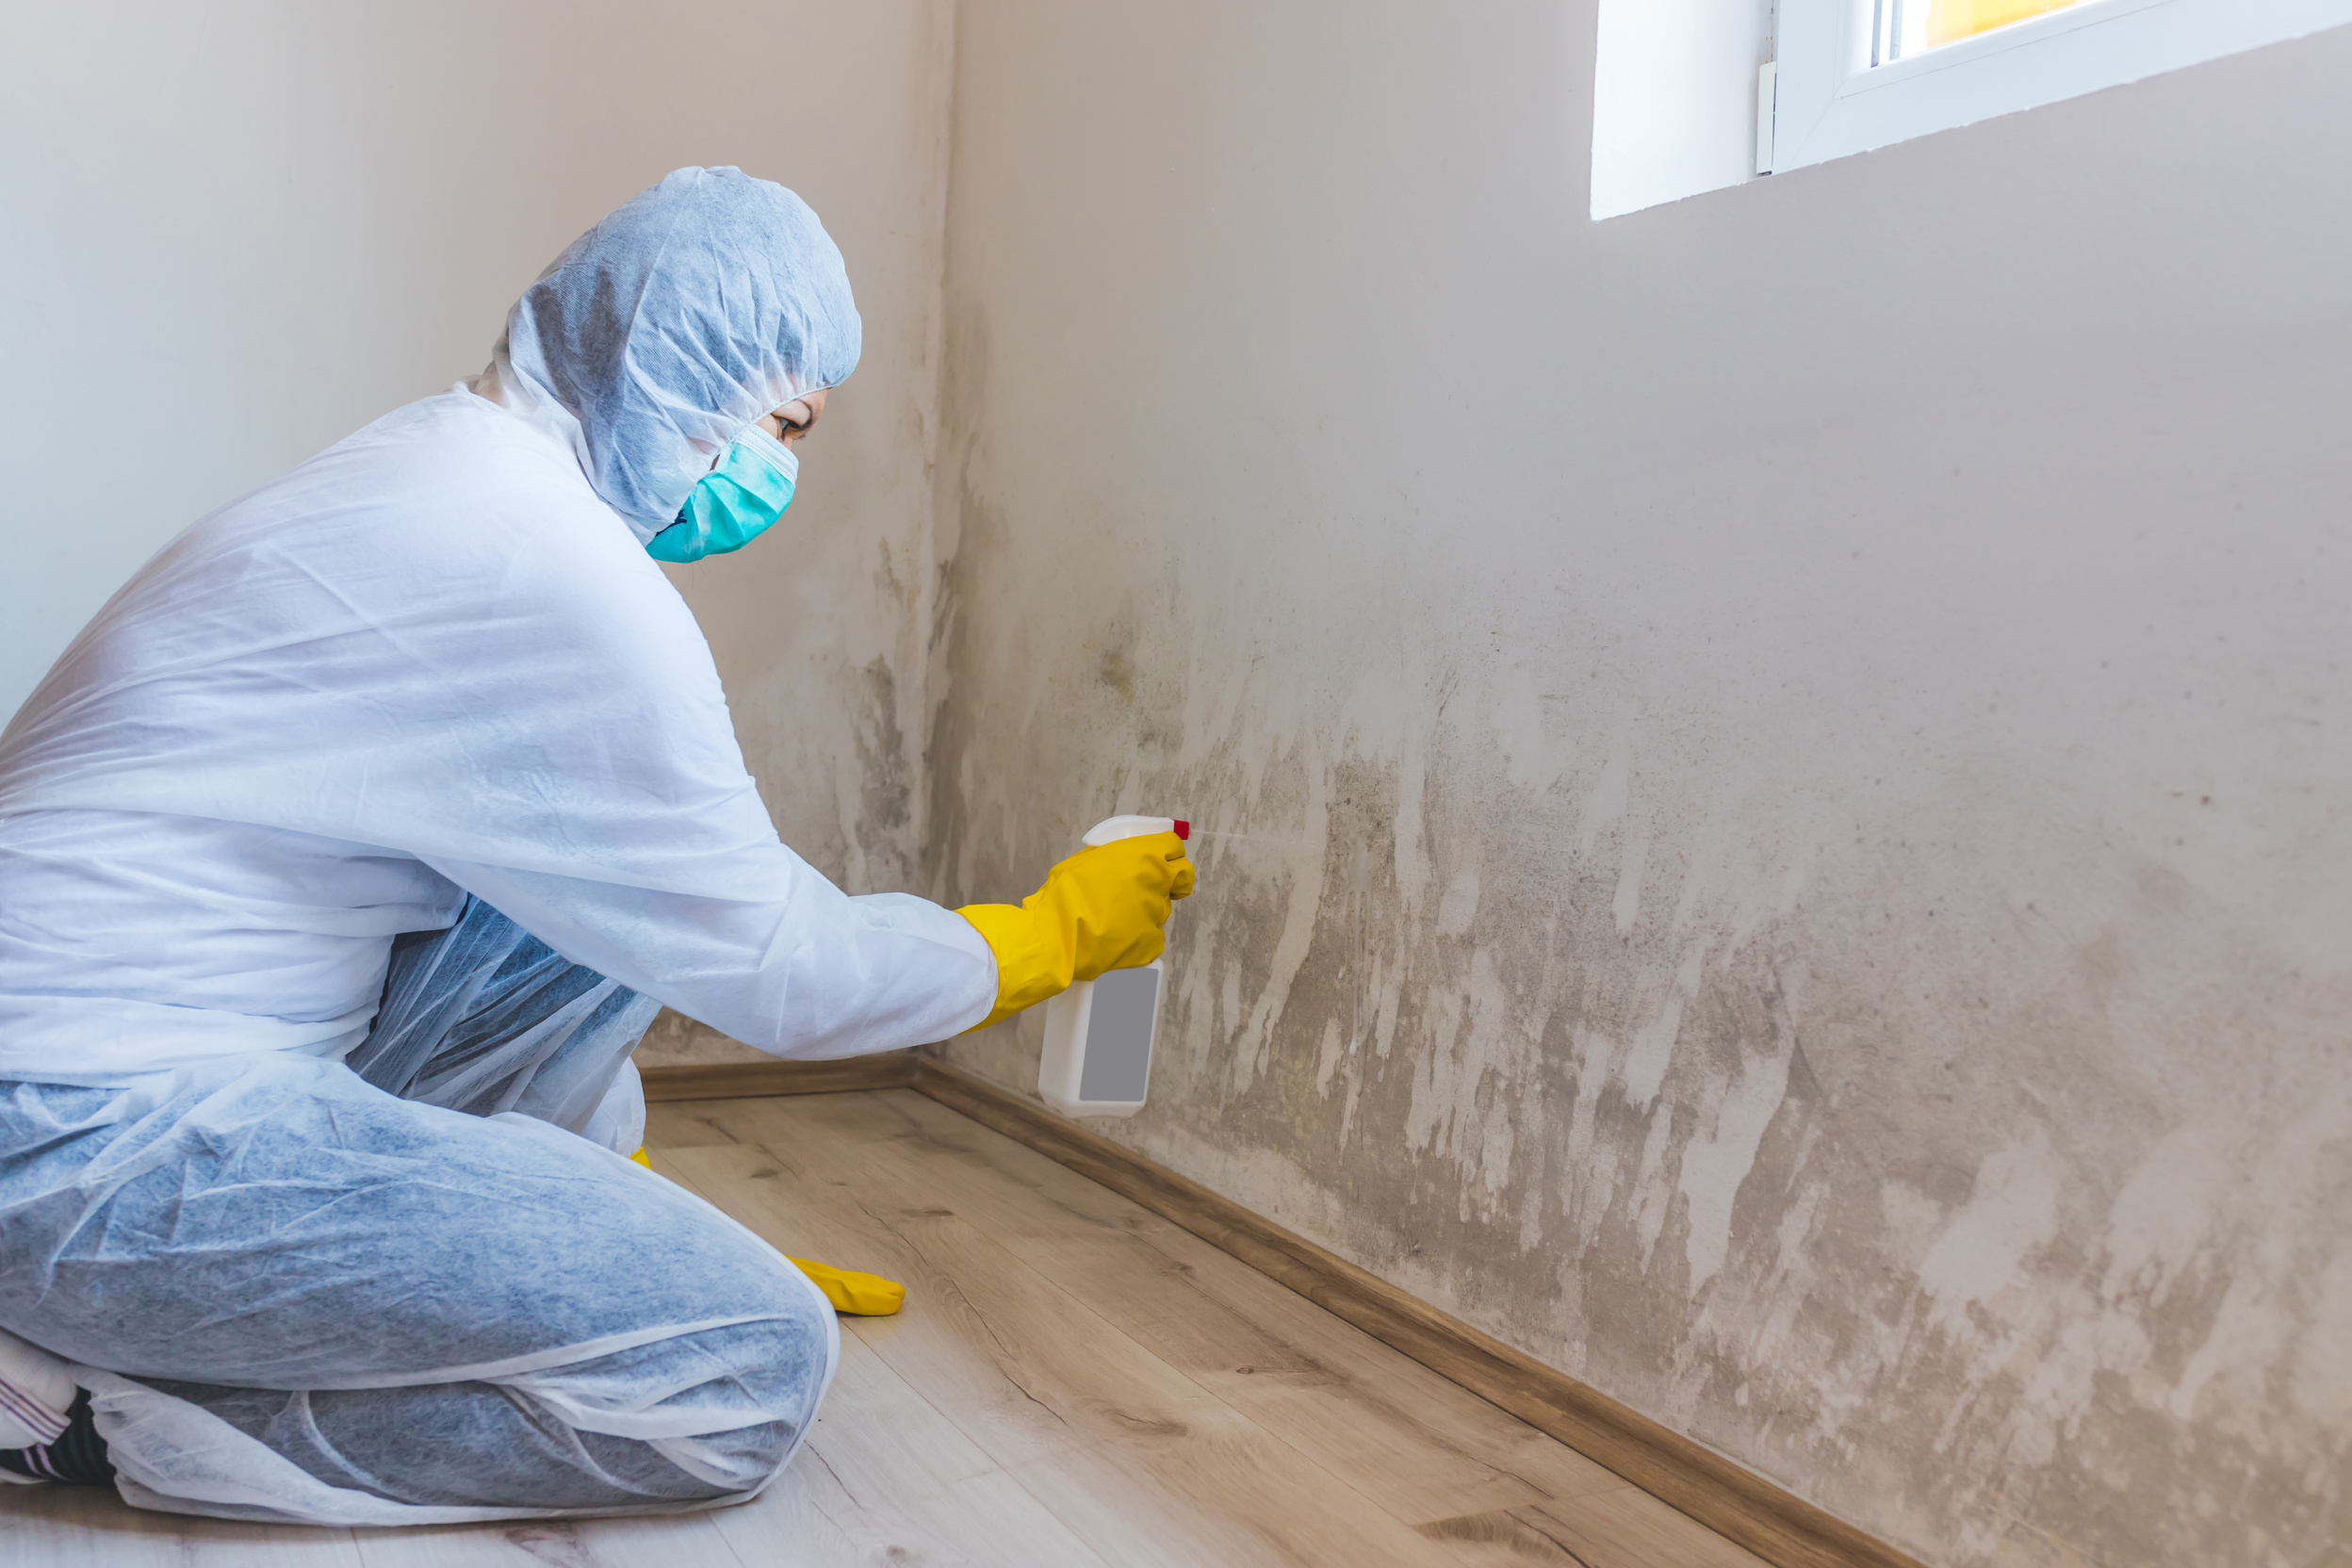 Woman removes mold from wall using spray bottle with mold remediation chemicals